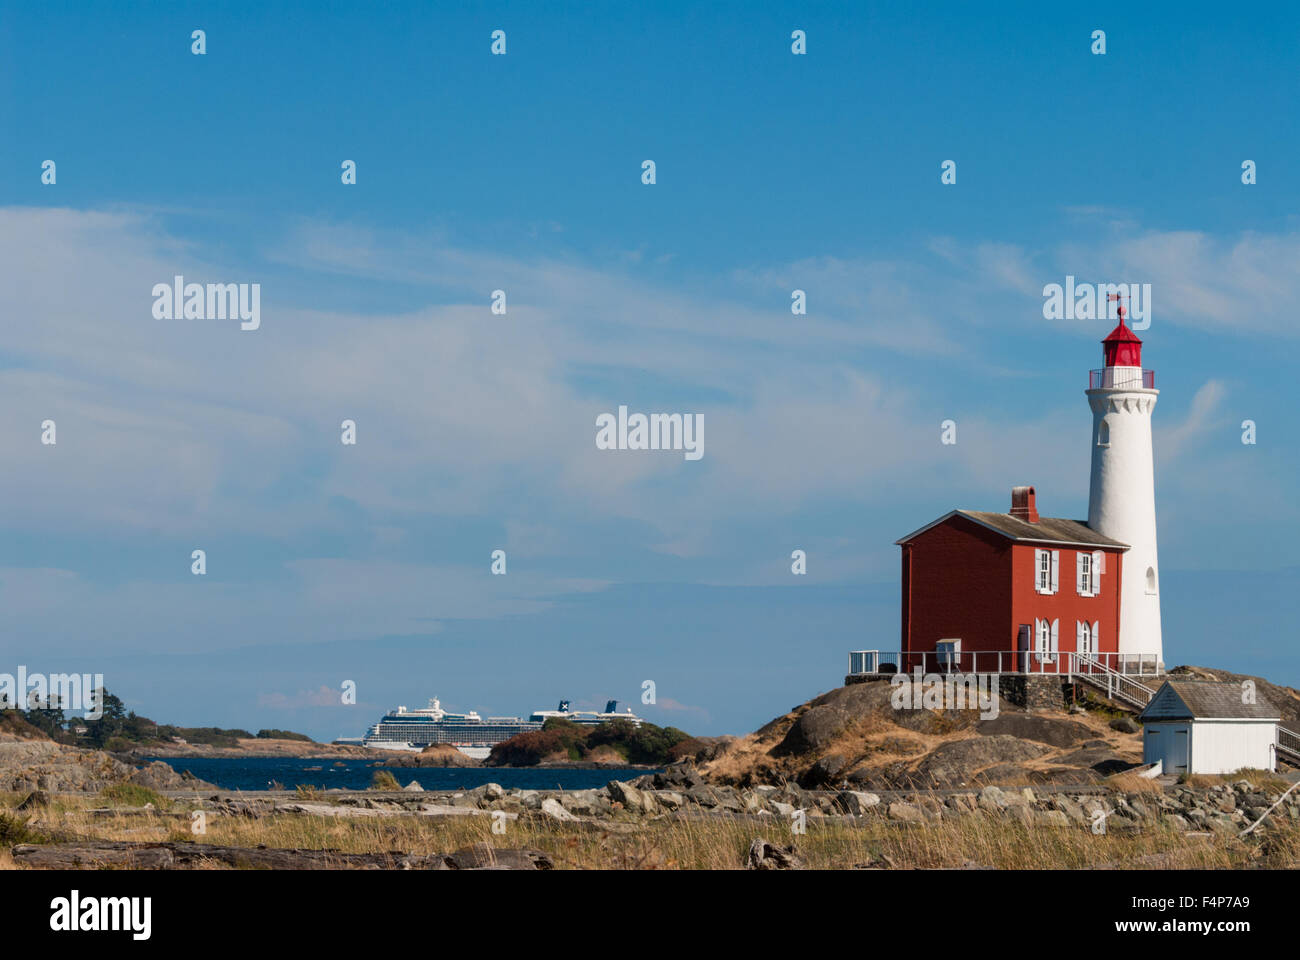 Fisgard lighthouse, with cruise ship passing in the background, Victoria, British Columbia, Canada Stock Photo